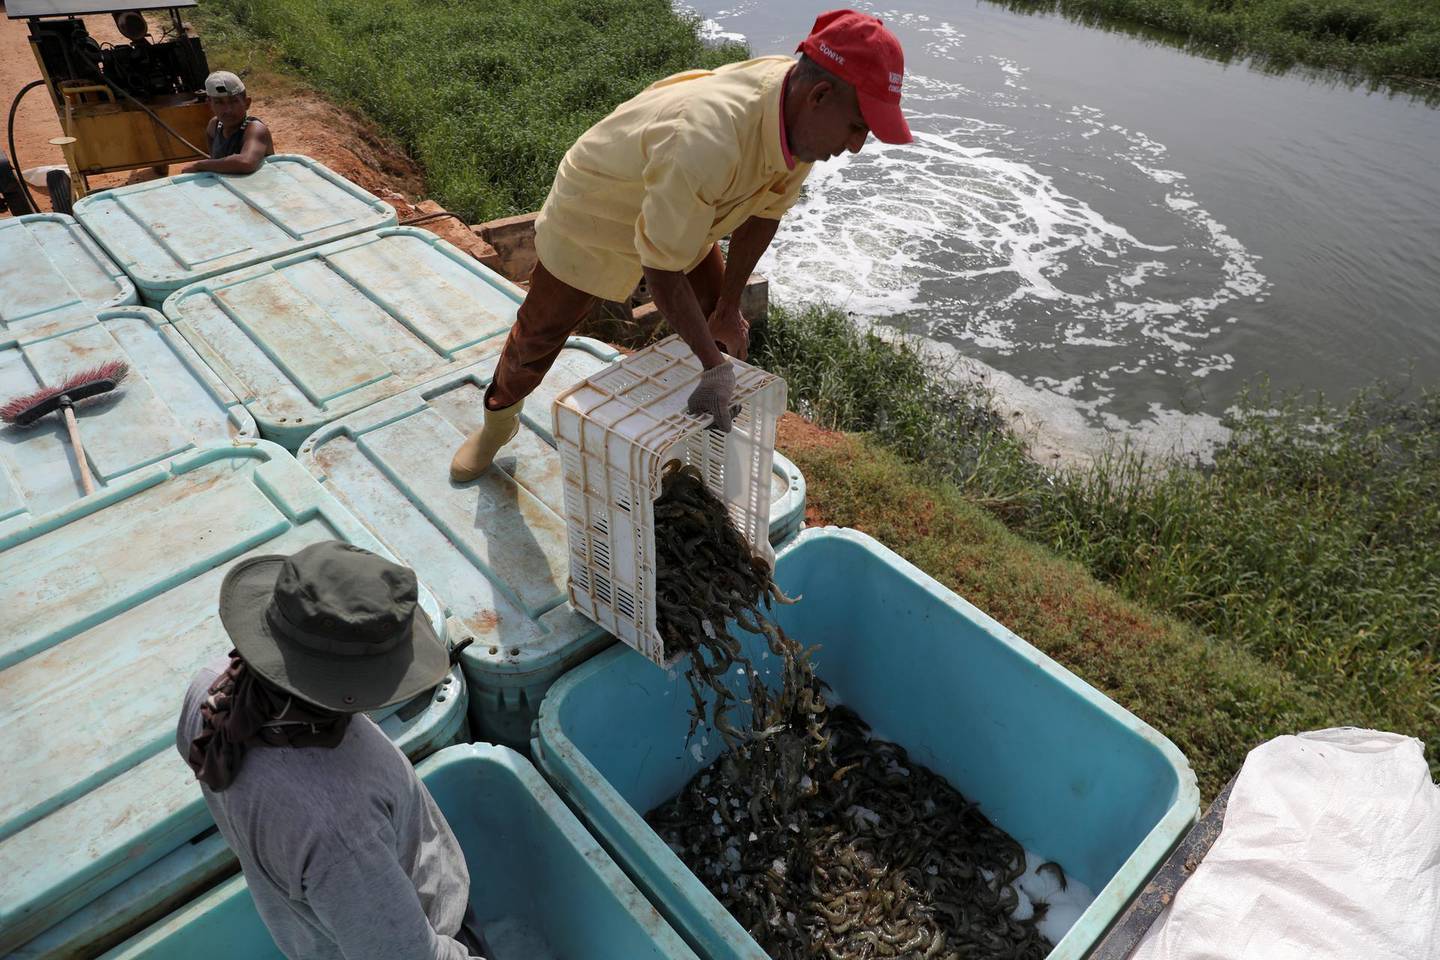 Workers collect shrimp from an artificial lake at a production farm near Maracaibo, Venezuela August 1, 2019. Picture taken August 1, 2019. REUTERS/Manaure Quintero